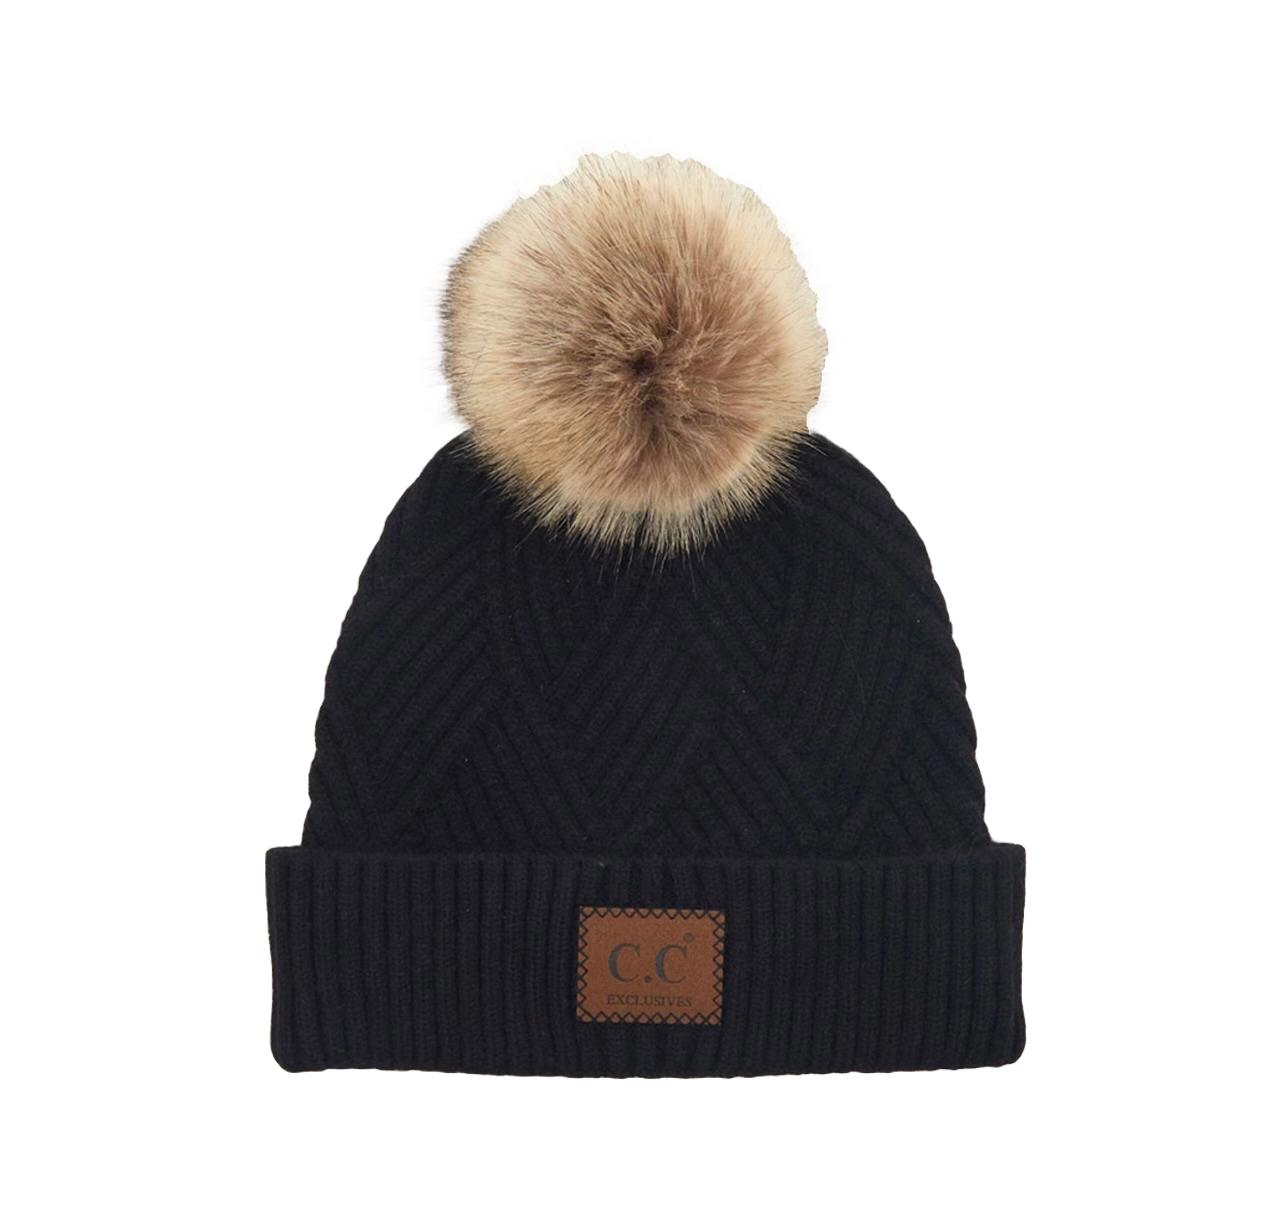 Black Woven Cable Knit Hat with Pom